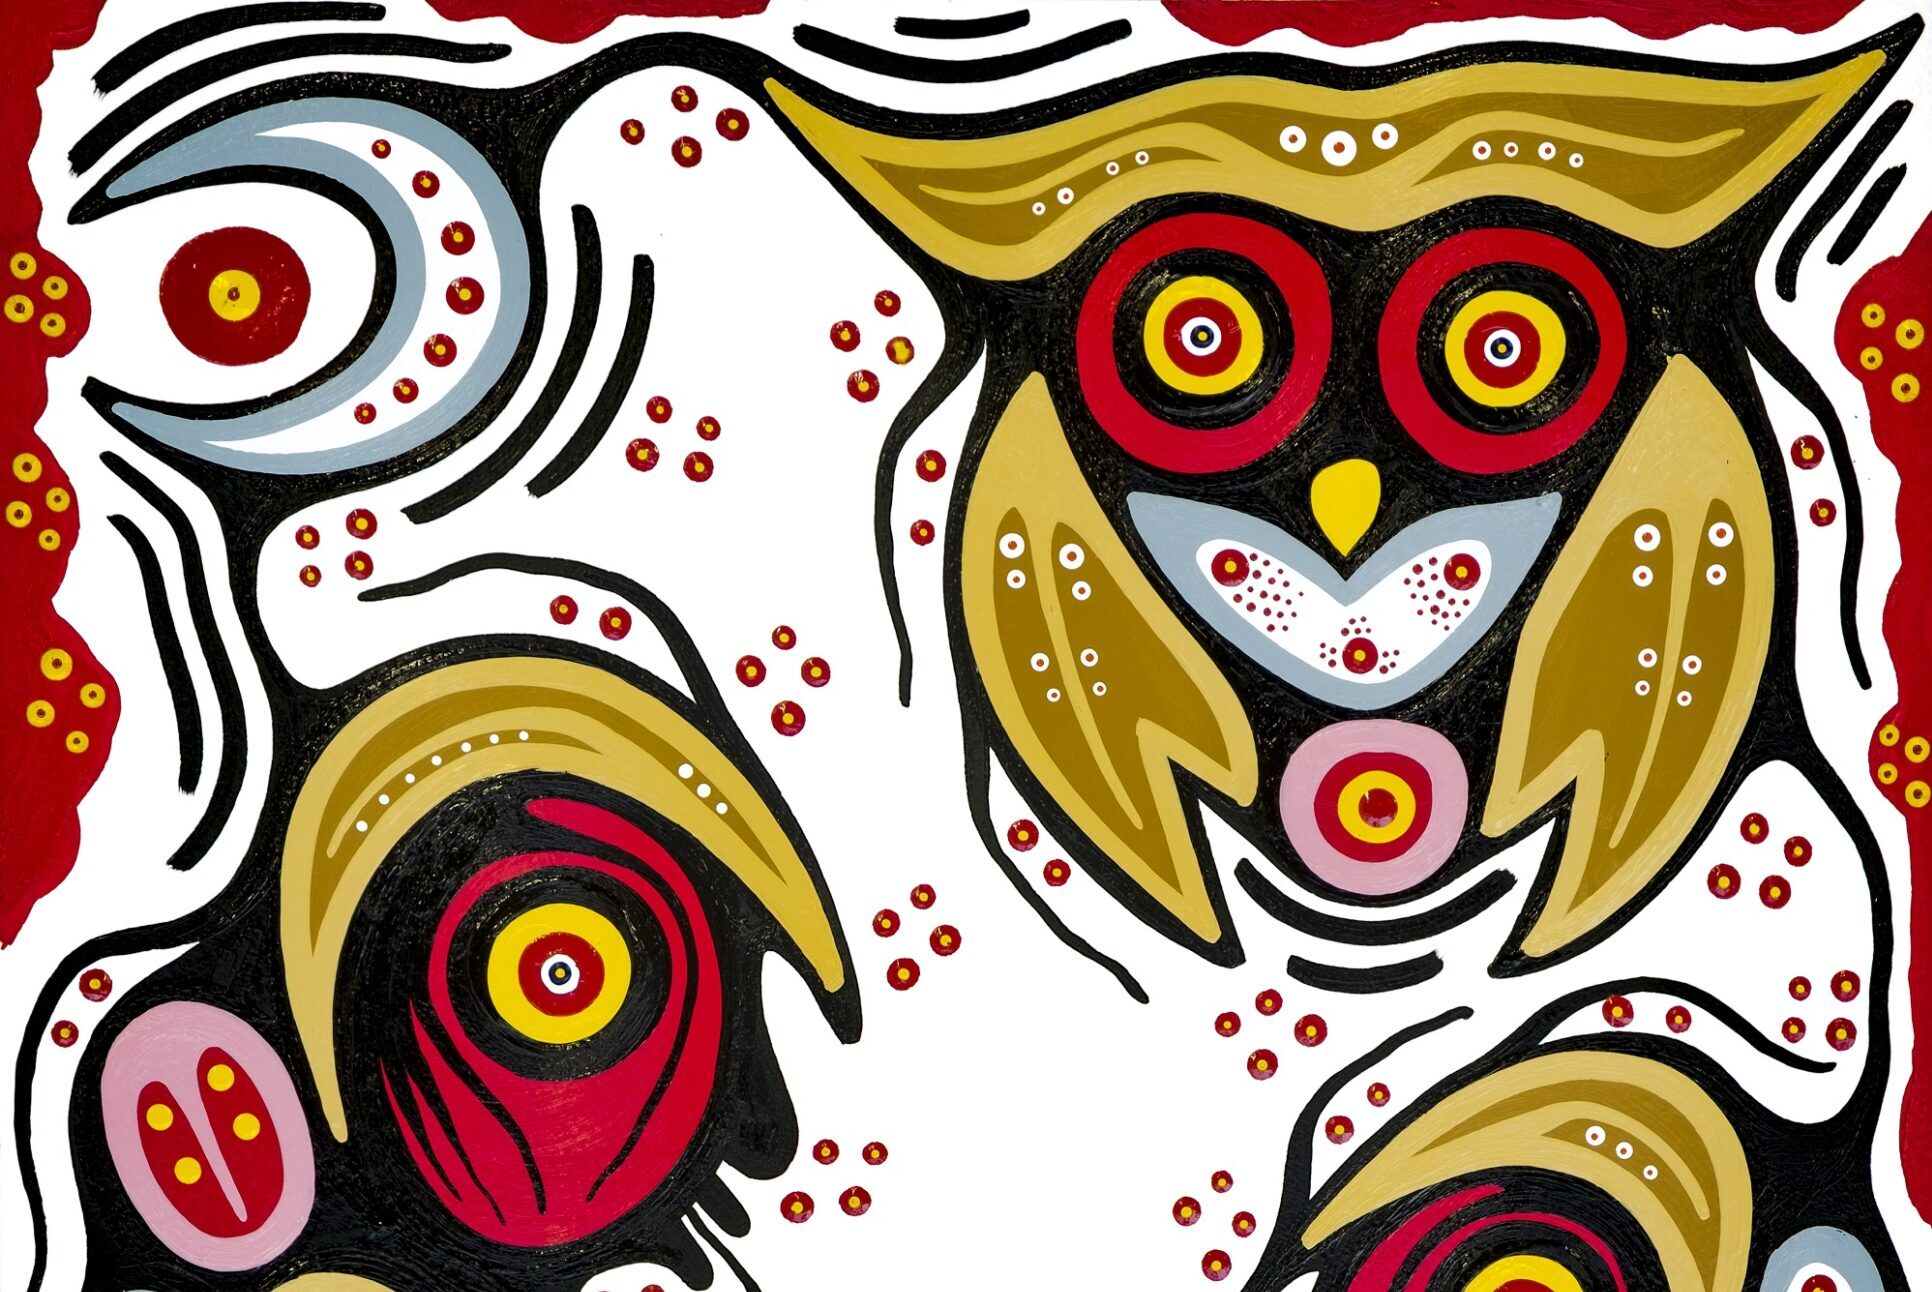 Woodland style painting of two stylized figures outlined in black facing each other. They have red skin with bodies composed of yellow, blue, and pink outlined shapes. A black line connects their mouths. Above is a blue moon and owl. The background has red dots and a red border.